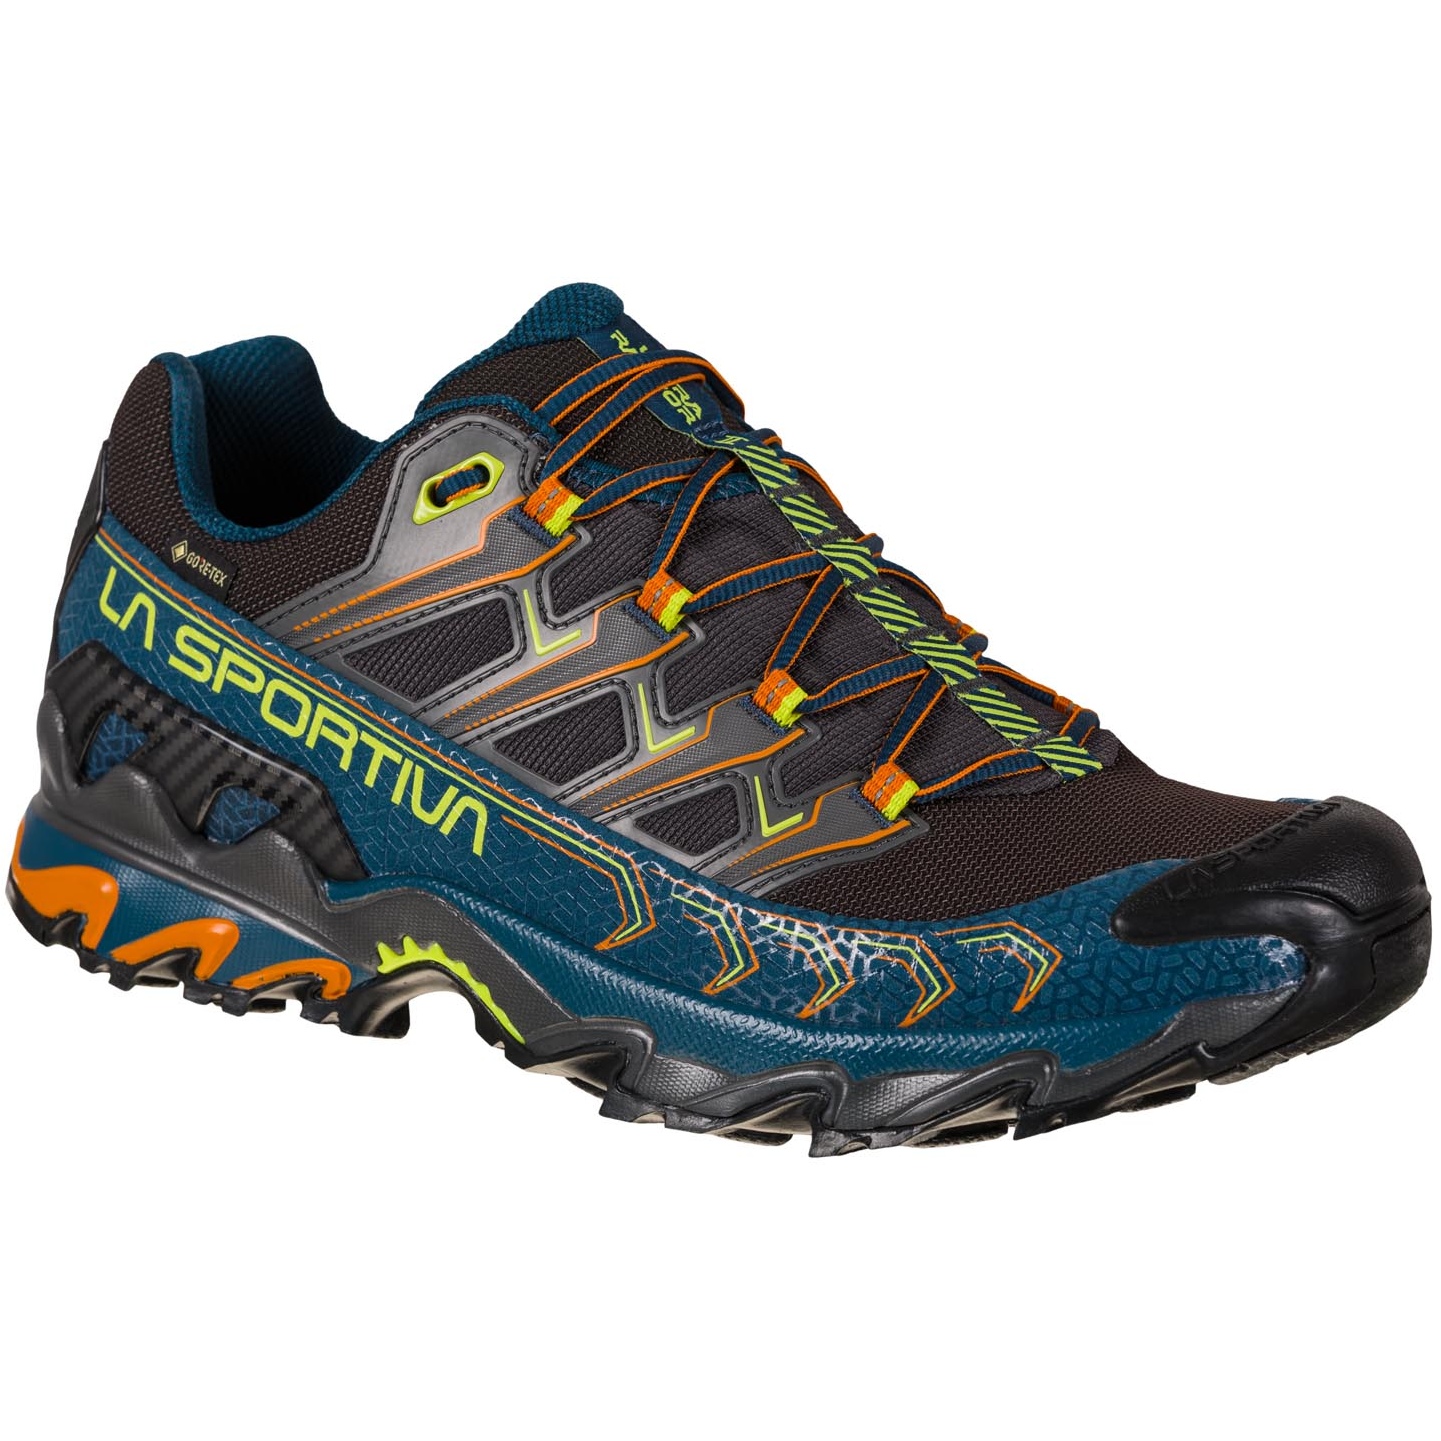 Picture of La Sportiva Ultra Raptor II GTX Running Shoes Men - Storm Blue/Lime Punch